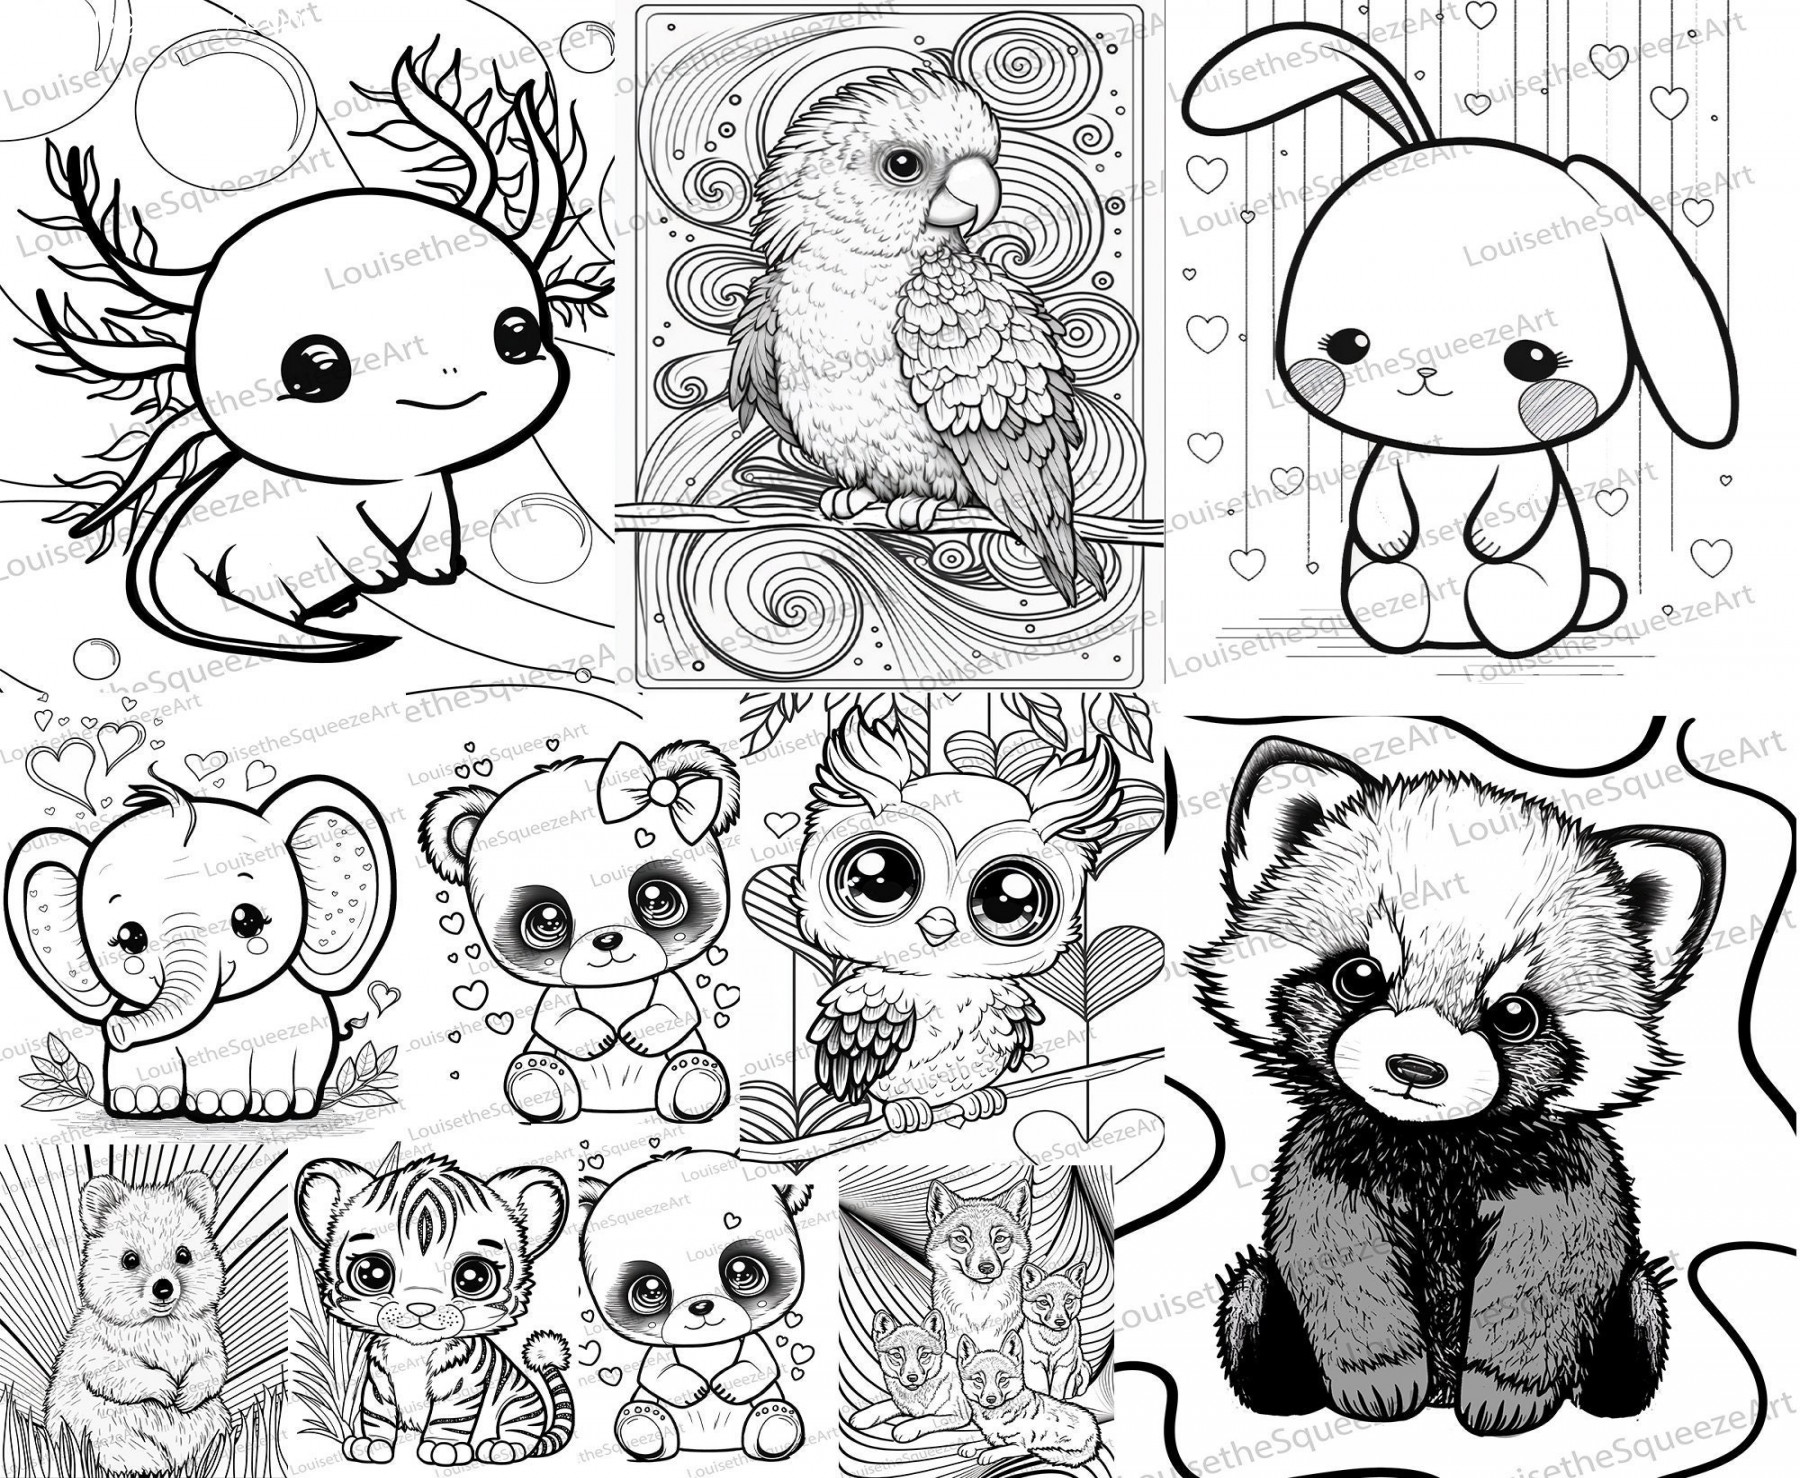 Variety Pack of Cute Animal Coloring Book Pages  - Etsy